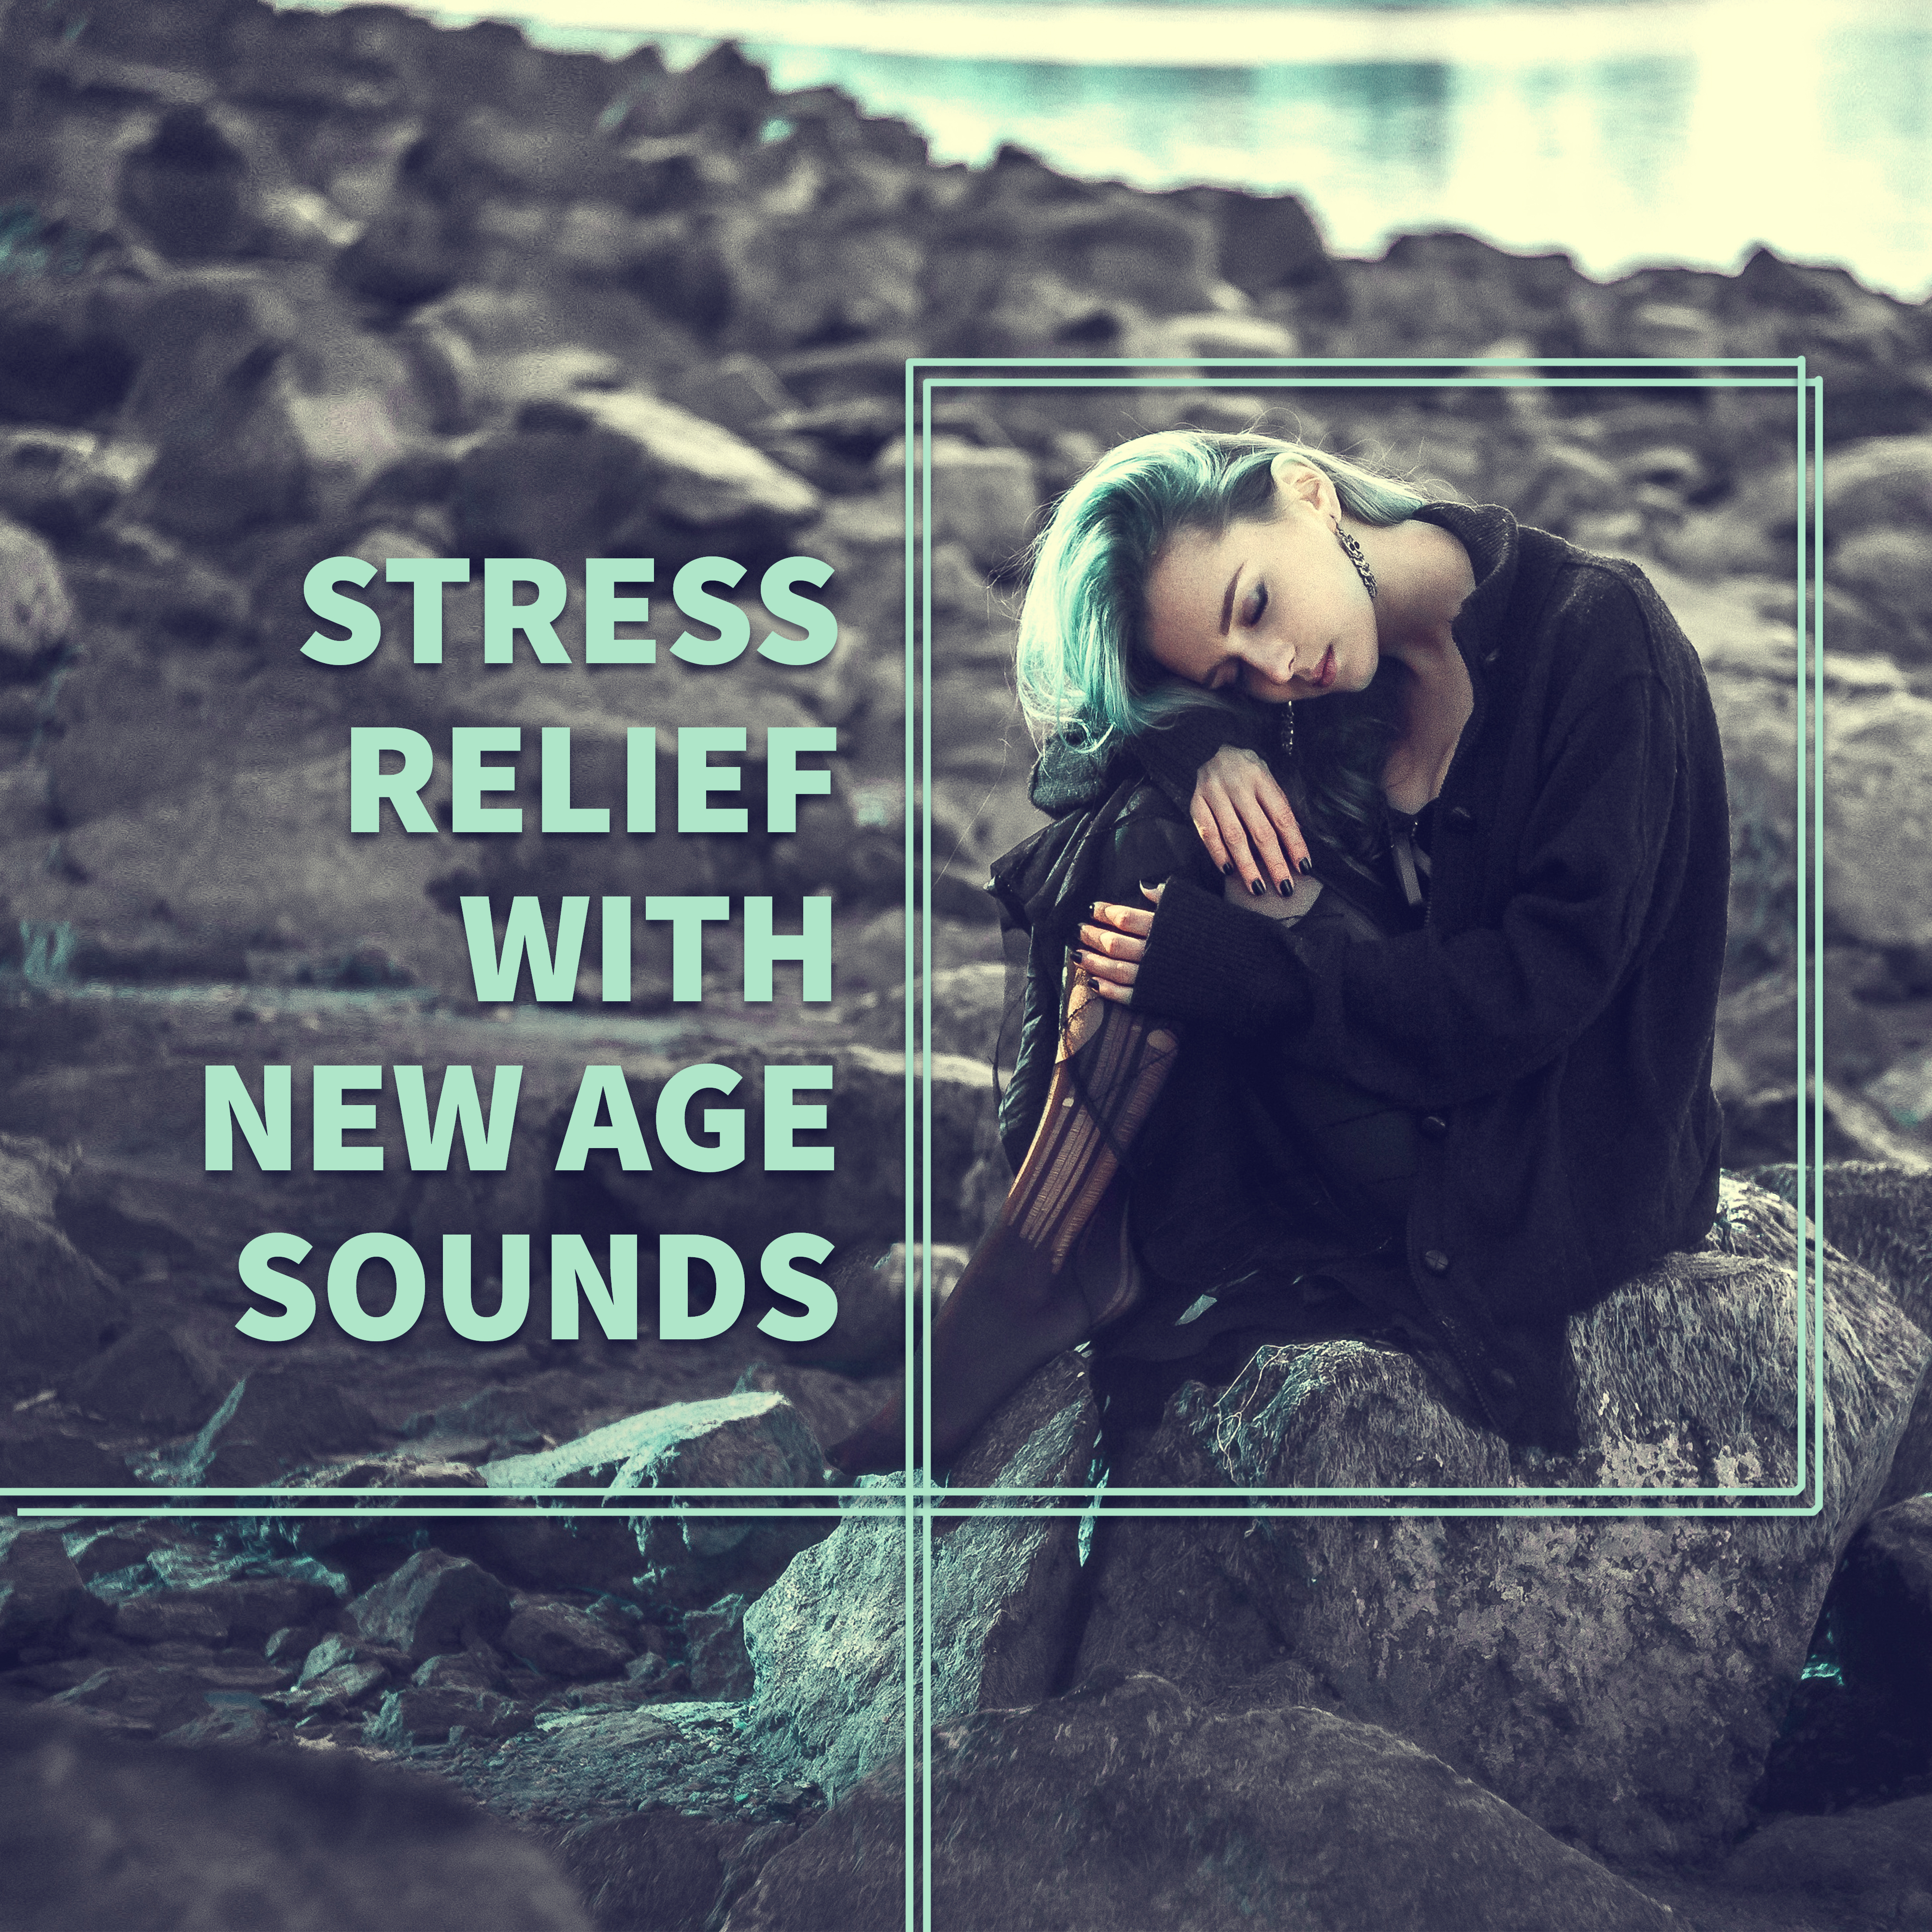 Stress Relief with New Age Sounds – Peaceful Music, Rest a Bit, Harmony Sounds, Spirit Free